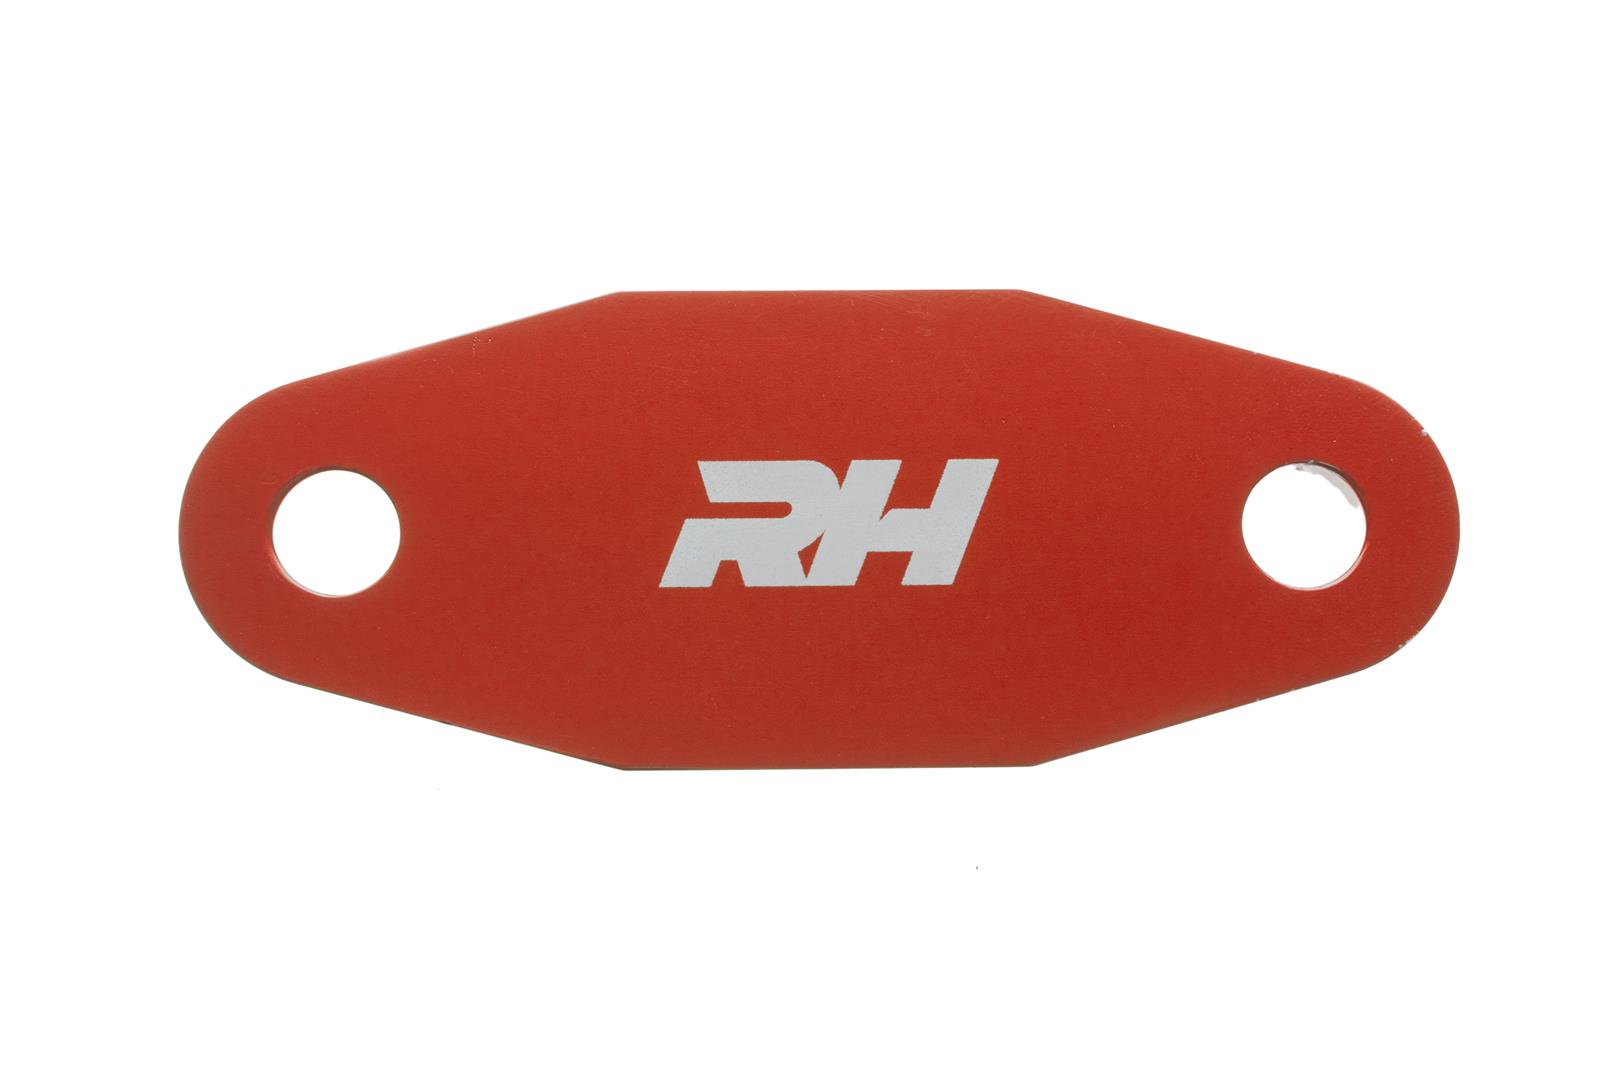 Redhorse Performance 4810-400-3 Aluminum Block-Off Plate for Ford 351C, 351M  and  400 ENGINE - Red